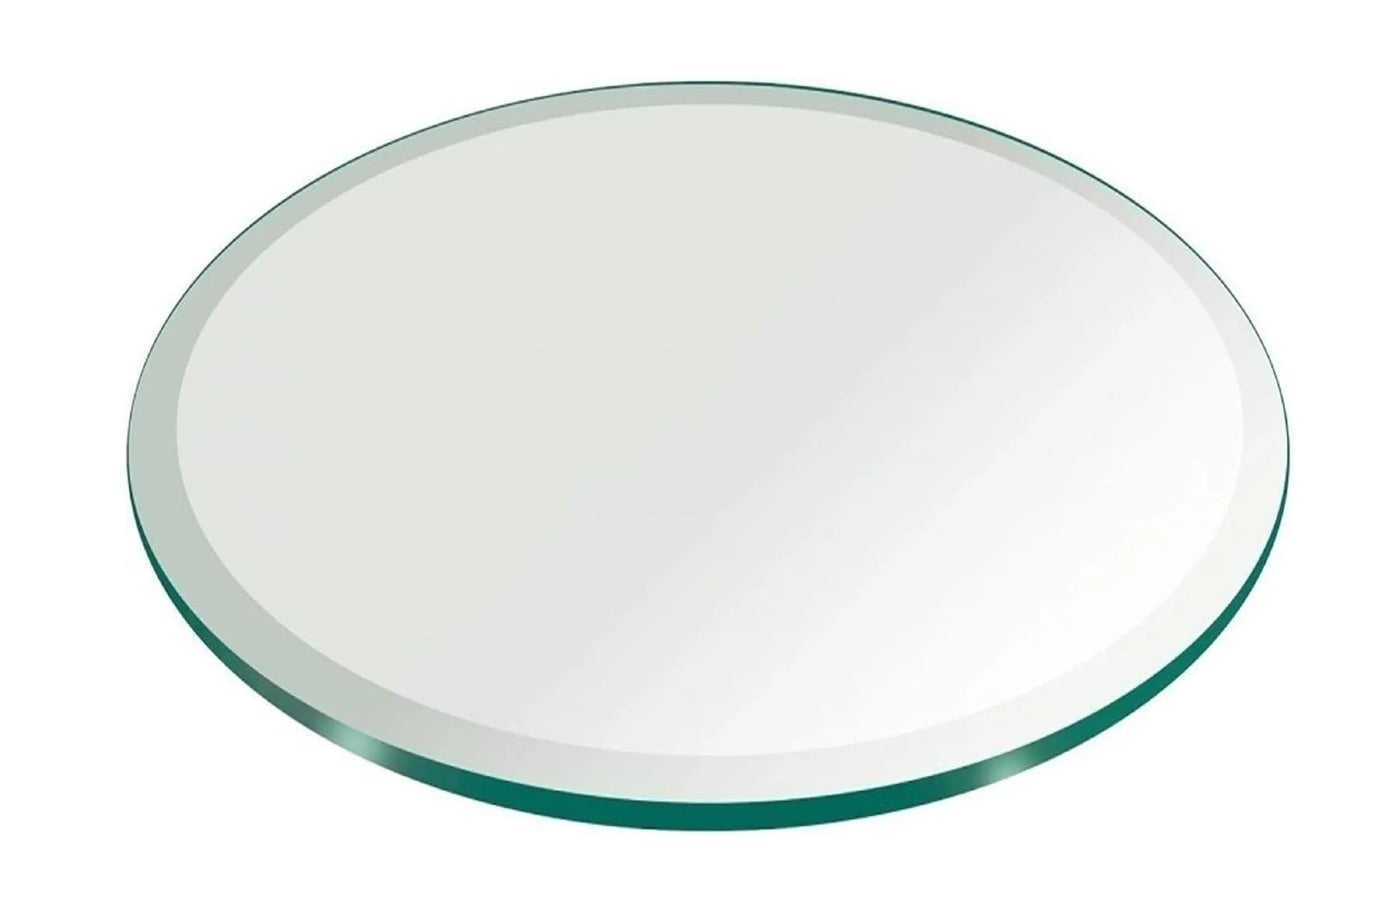 WIsdomFur 48" Round Tempered Glass Shelf Panel Table Top Clear